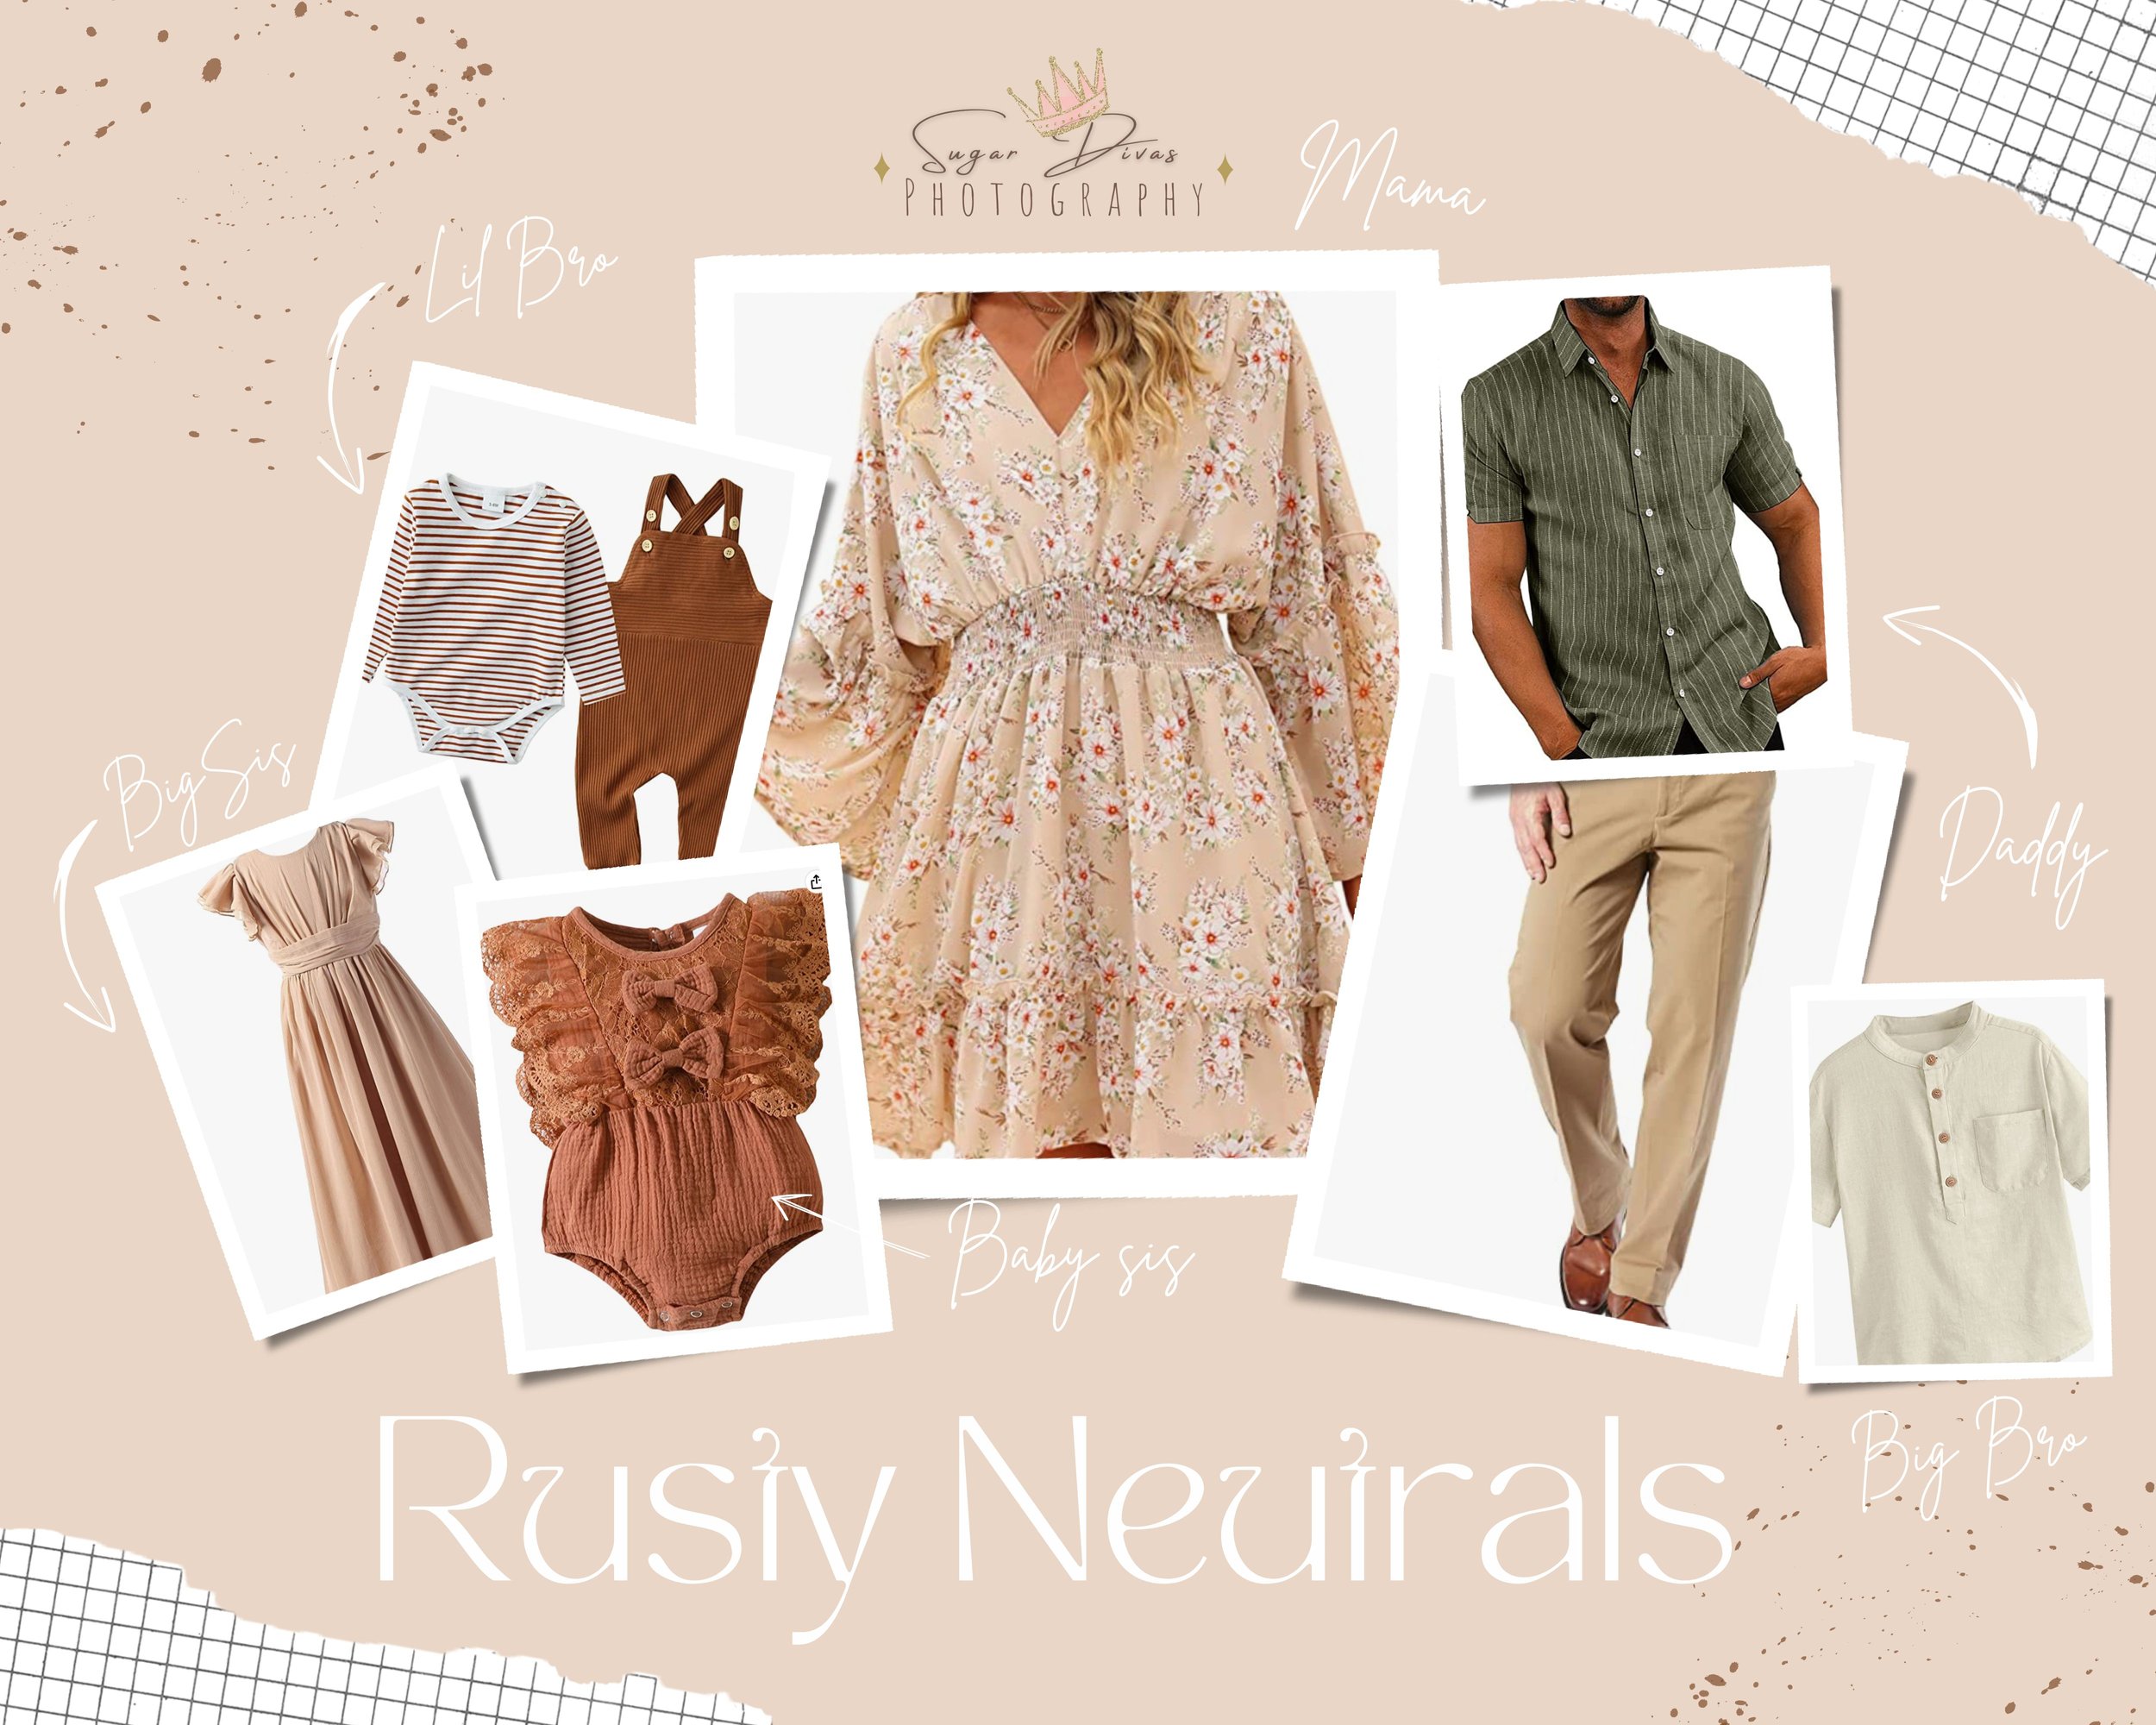 rust neutral family outfits for outdoor photos in fall